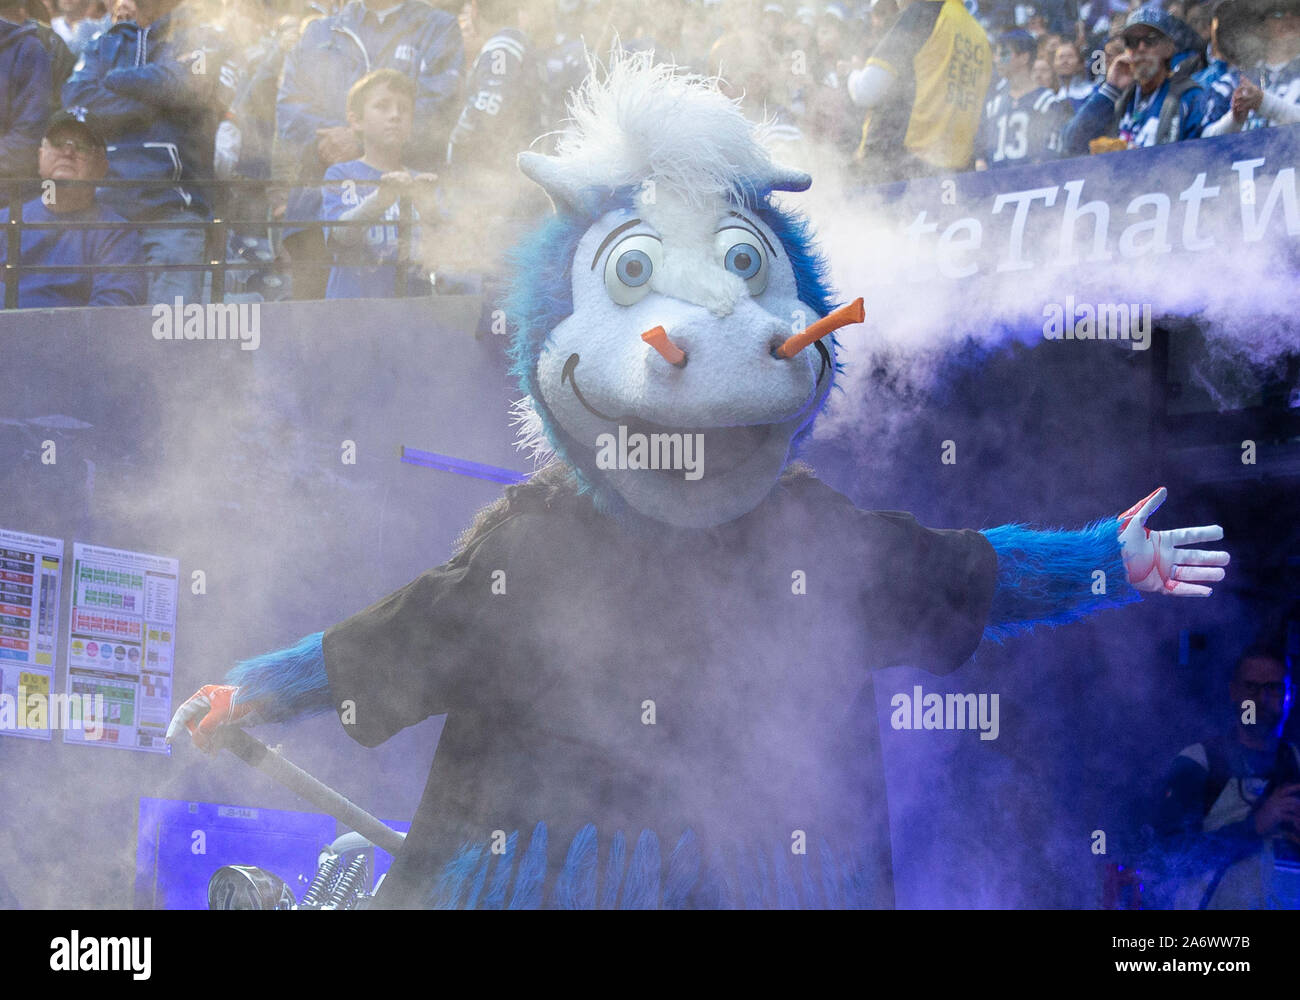 Indianapolis, Indiana, USA. 27th Oct, 2019. Indianapolis Colts mascot Blue during NFL football game action between the Denver Broncos and the Indianapolis Colts at Lucas Oil Stadium in Indianapolis, Indiana. Indianapolis defeated Denver 15-13. John Mersits/CSM/Alamy Live News Stock Photo